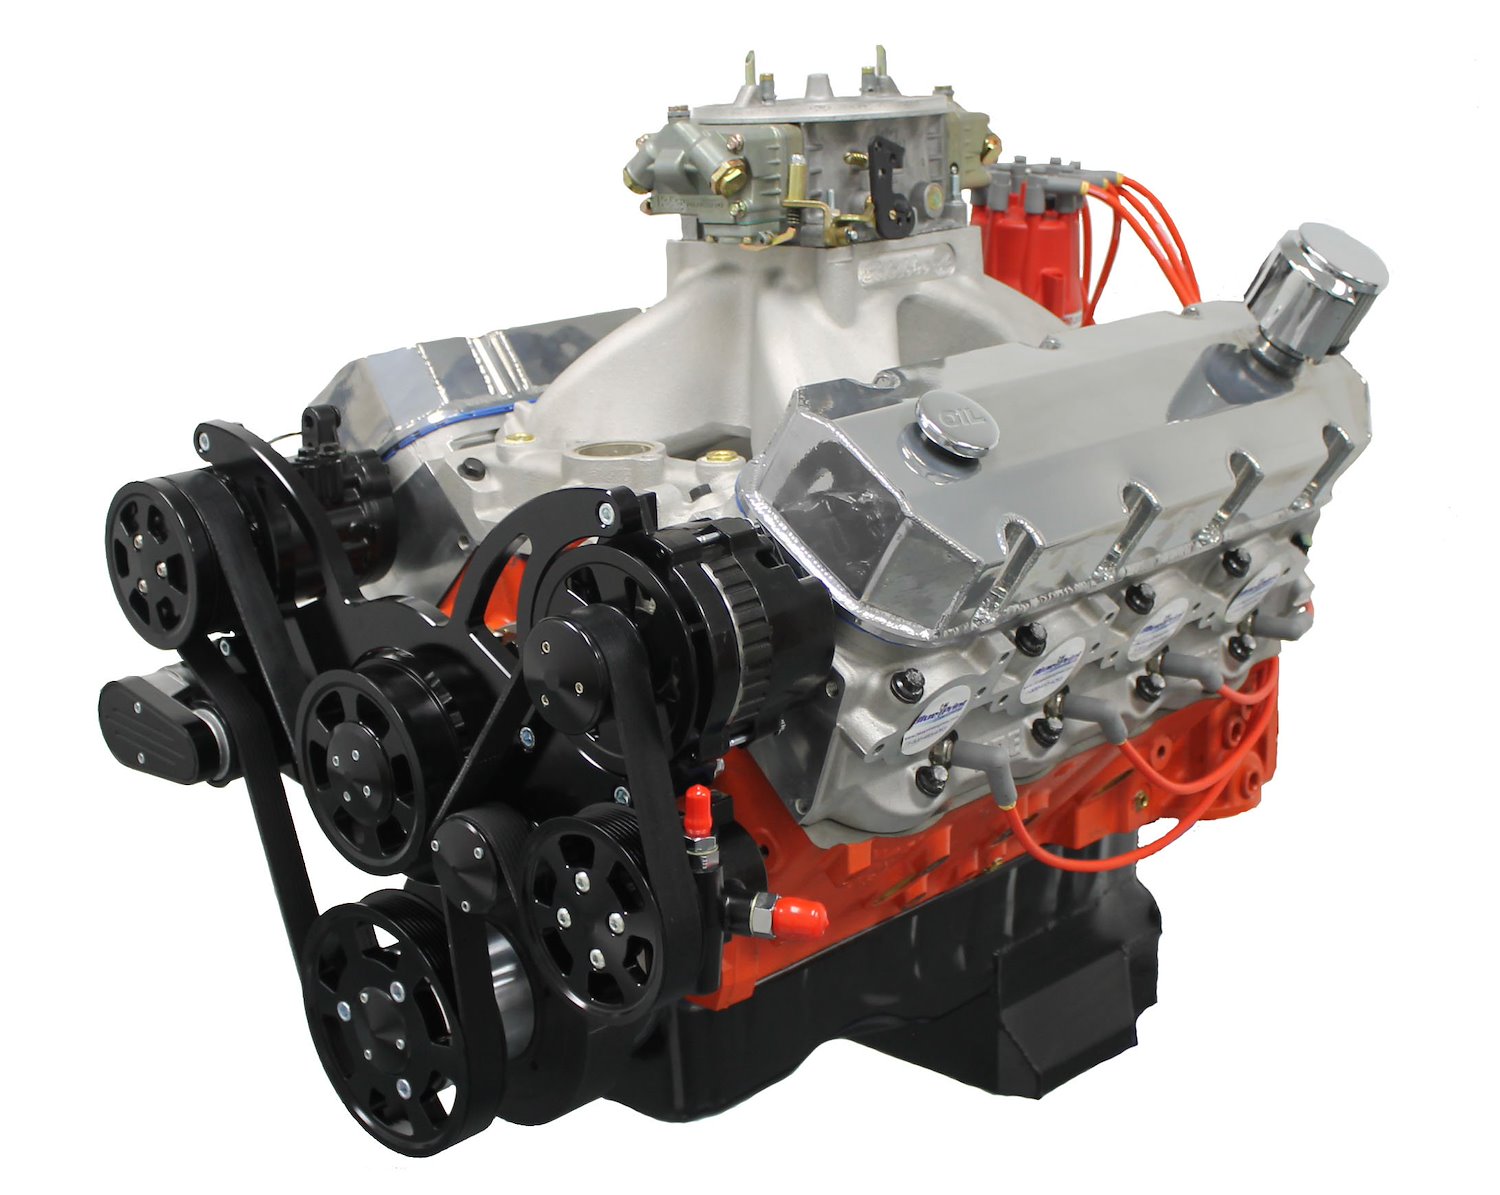 Pro Series Big Block Chevy 509 ci Drop-In Ready Crate Engine [640 HP | 605 ft.-lbs. of TQ]